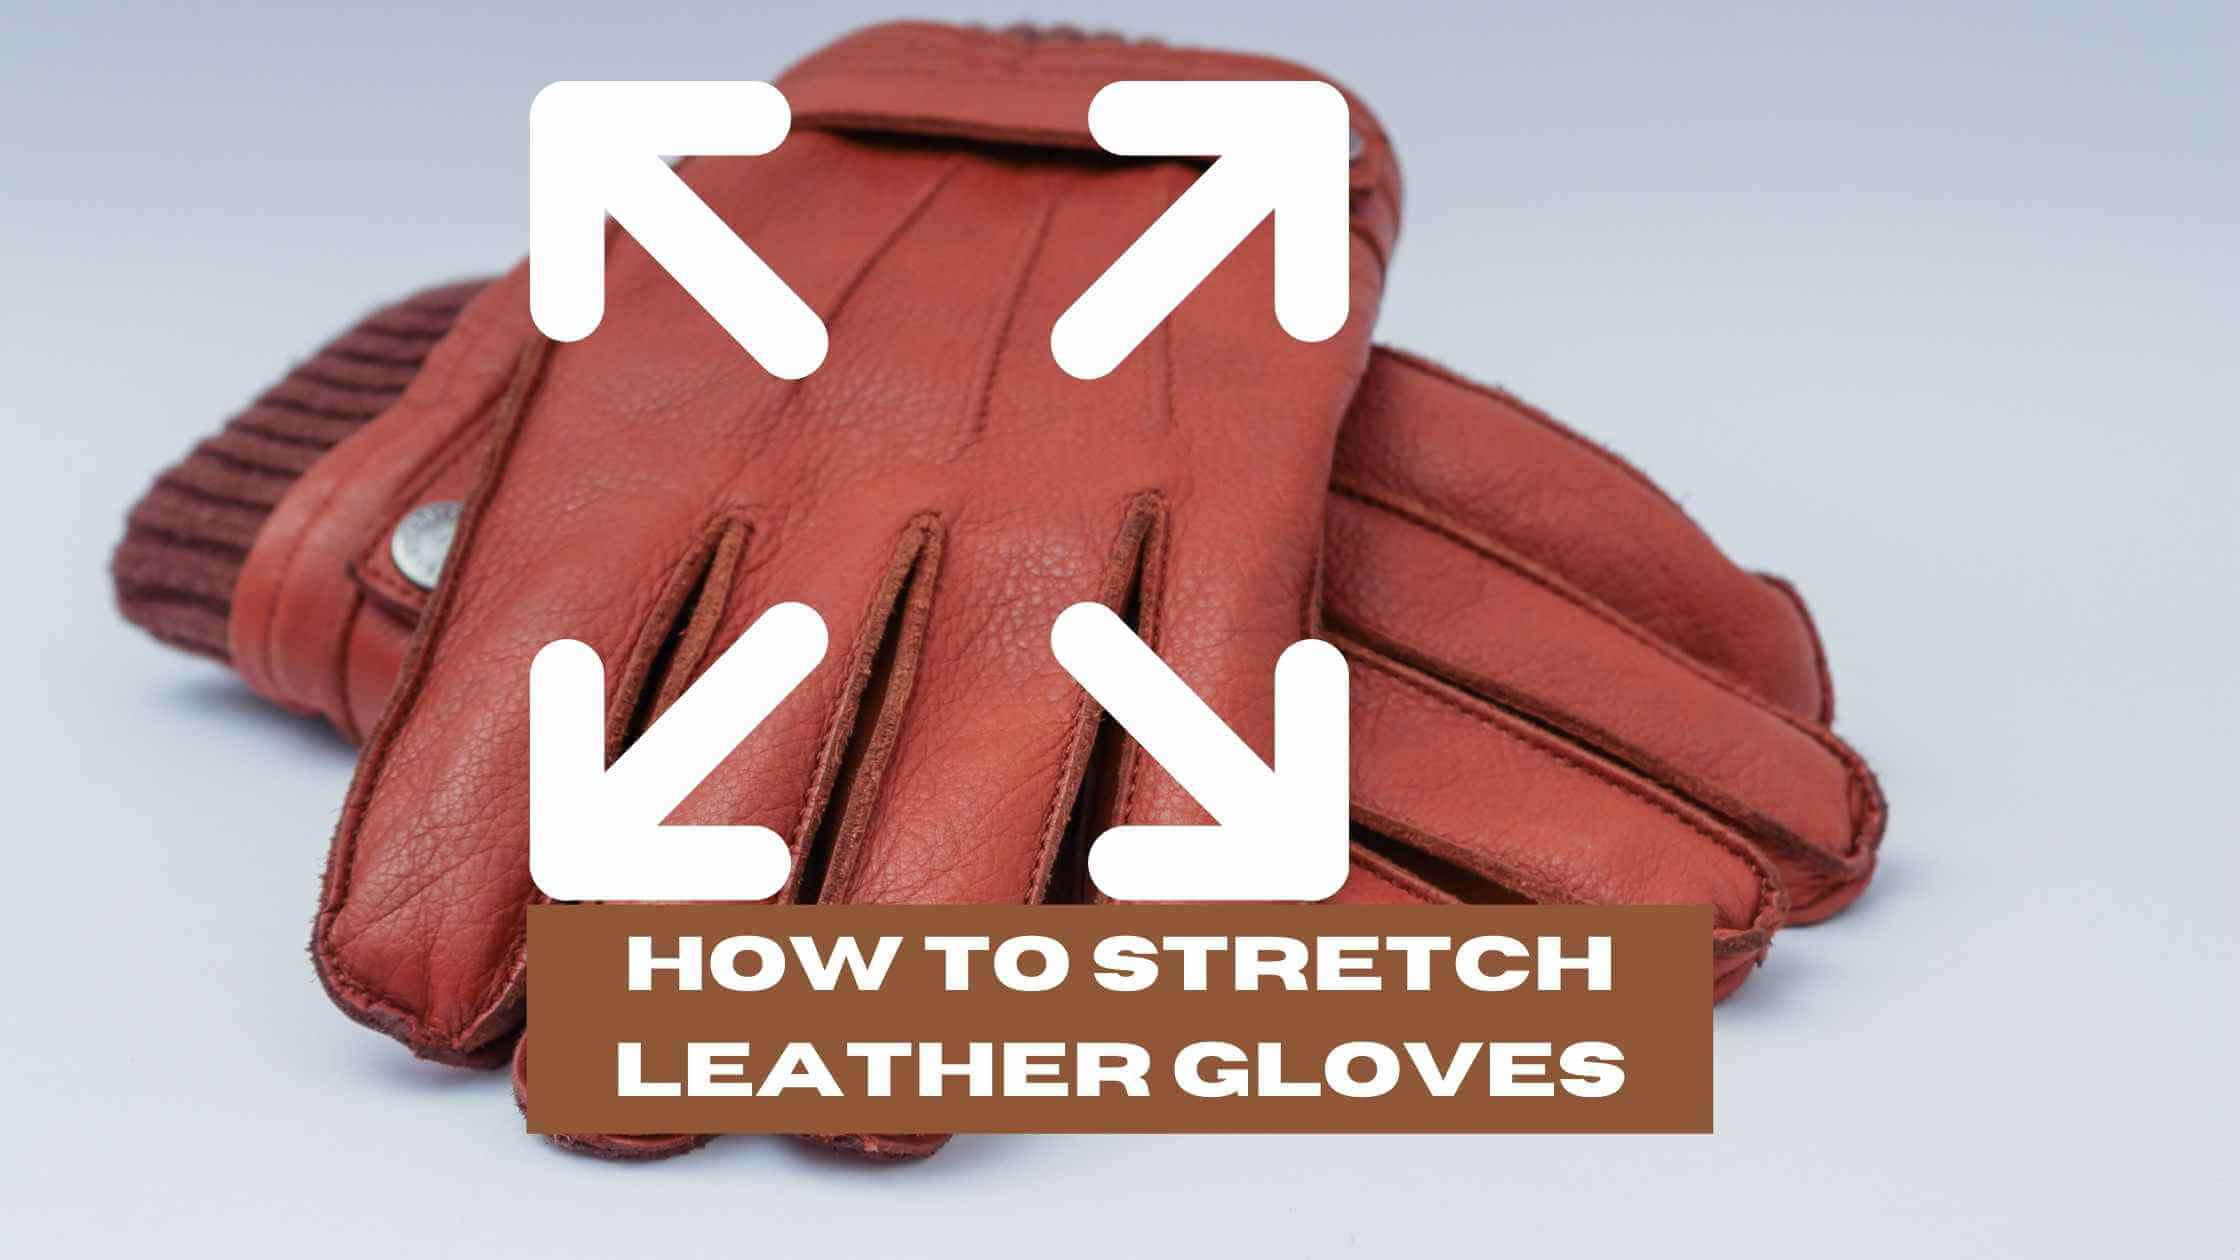 How to Stretch Leather Gloves